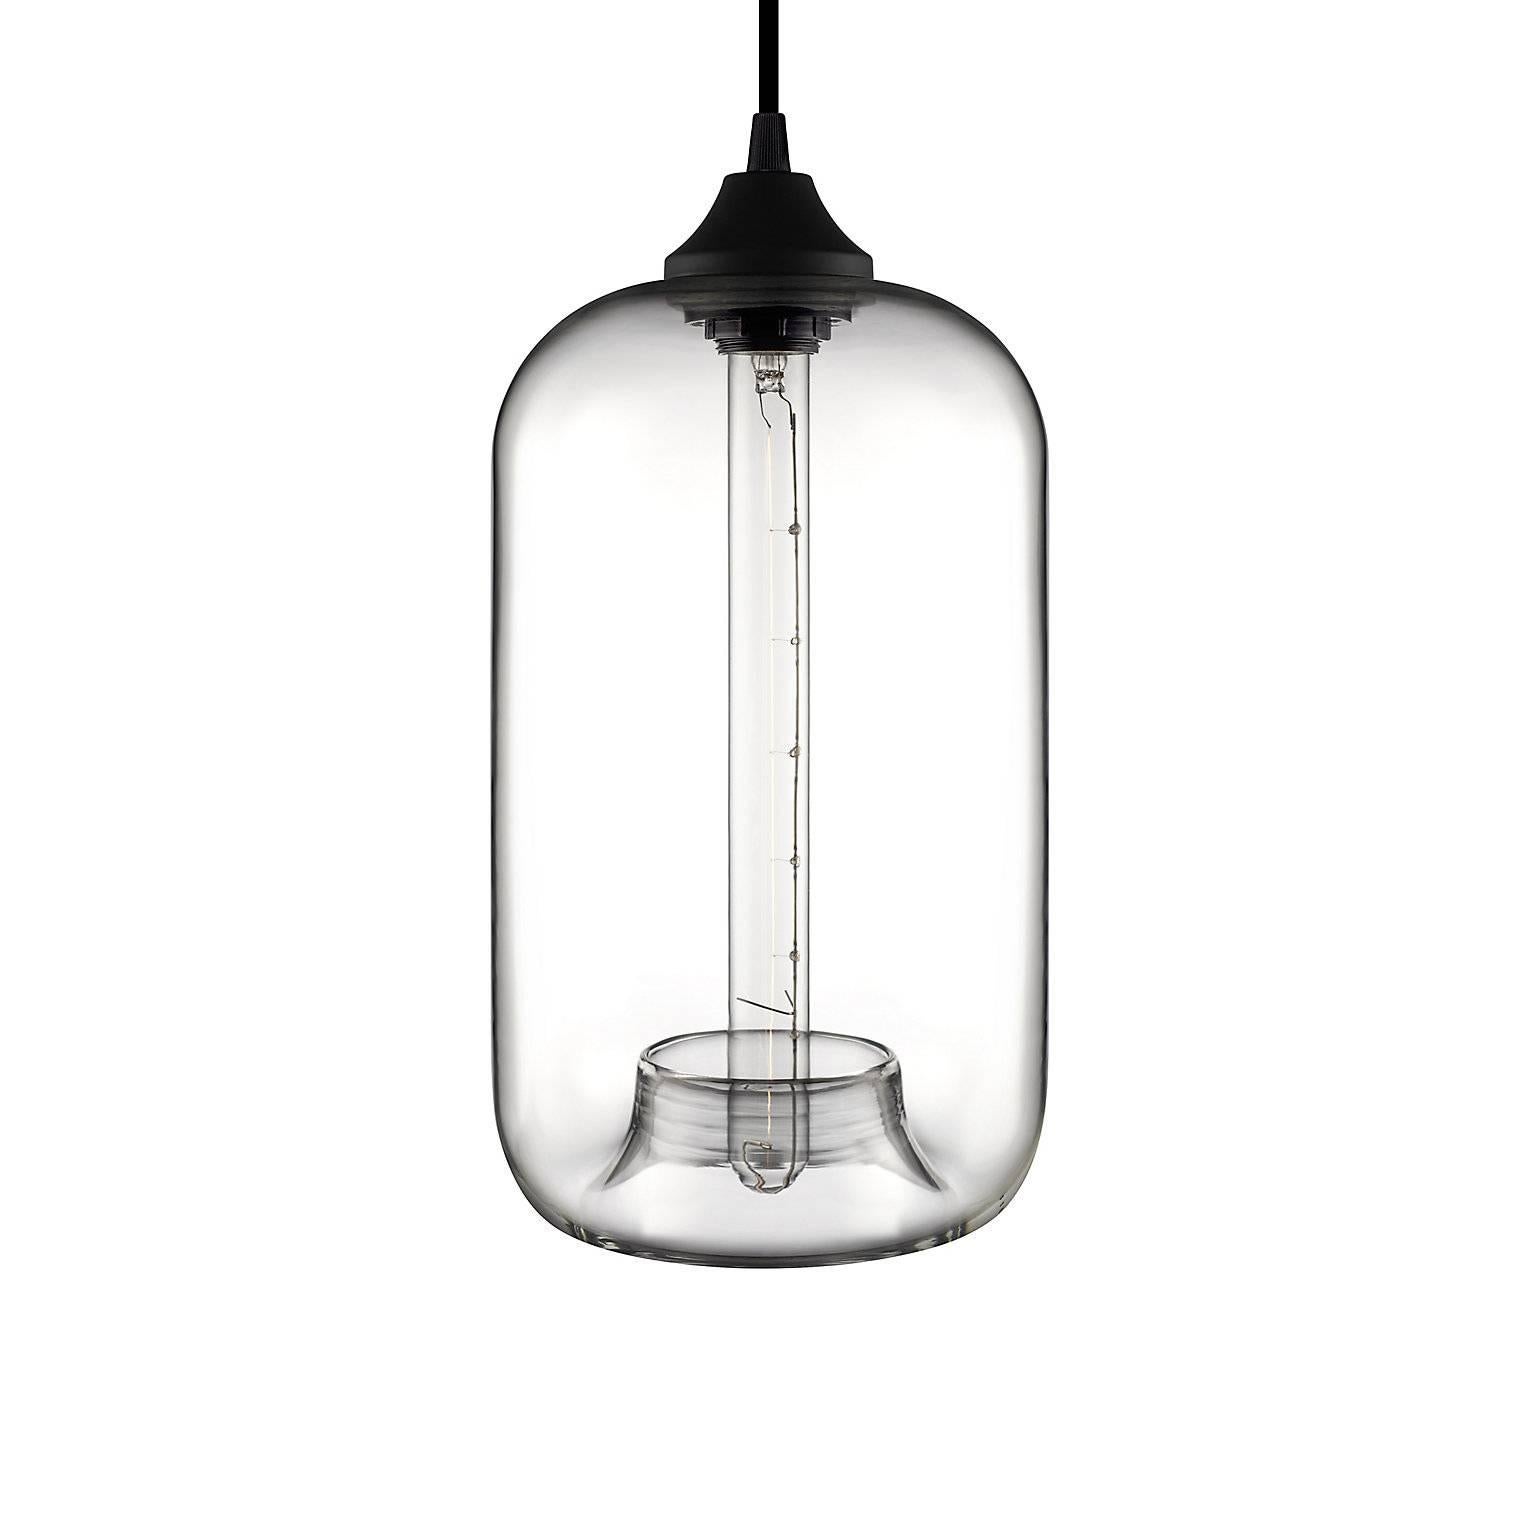 The distinctive handcrafted tuck defines the Pod pendant and draws the eye down the silhouette's long, cylindrical frame. Every single glass pendant light that comes from Niche is handblown by real human beings in a state-of-the-art studio located